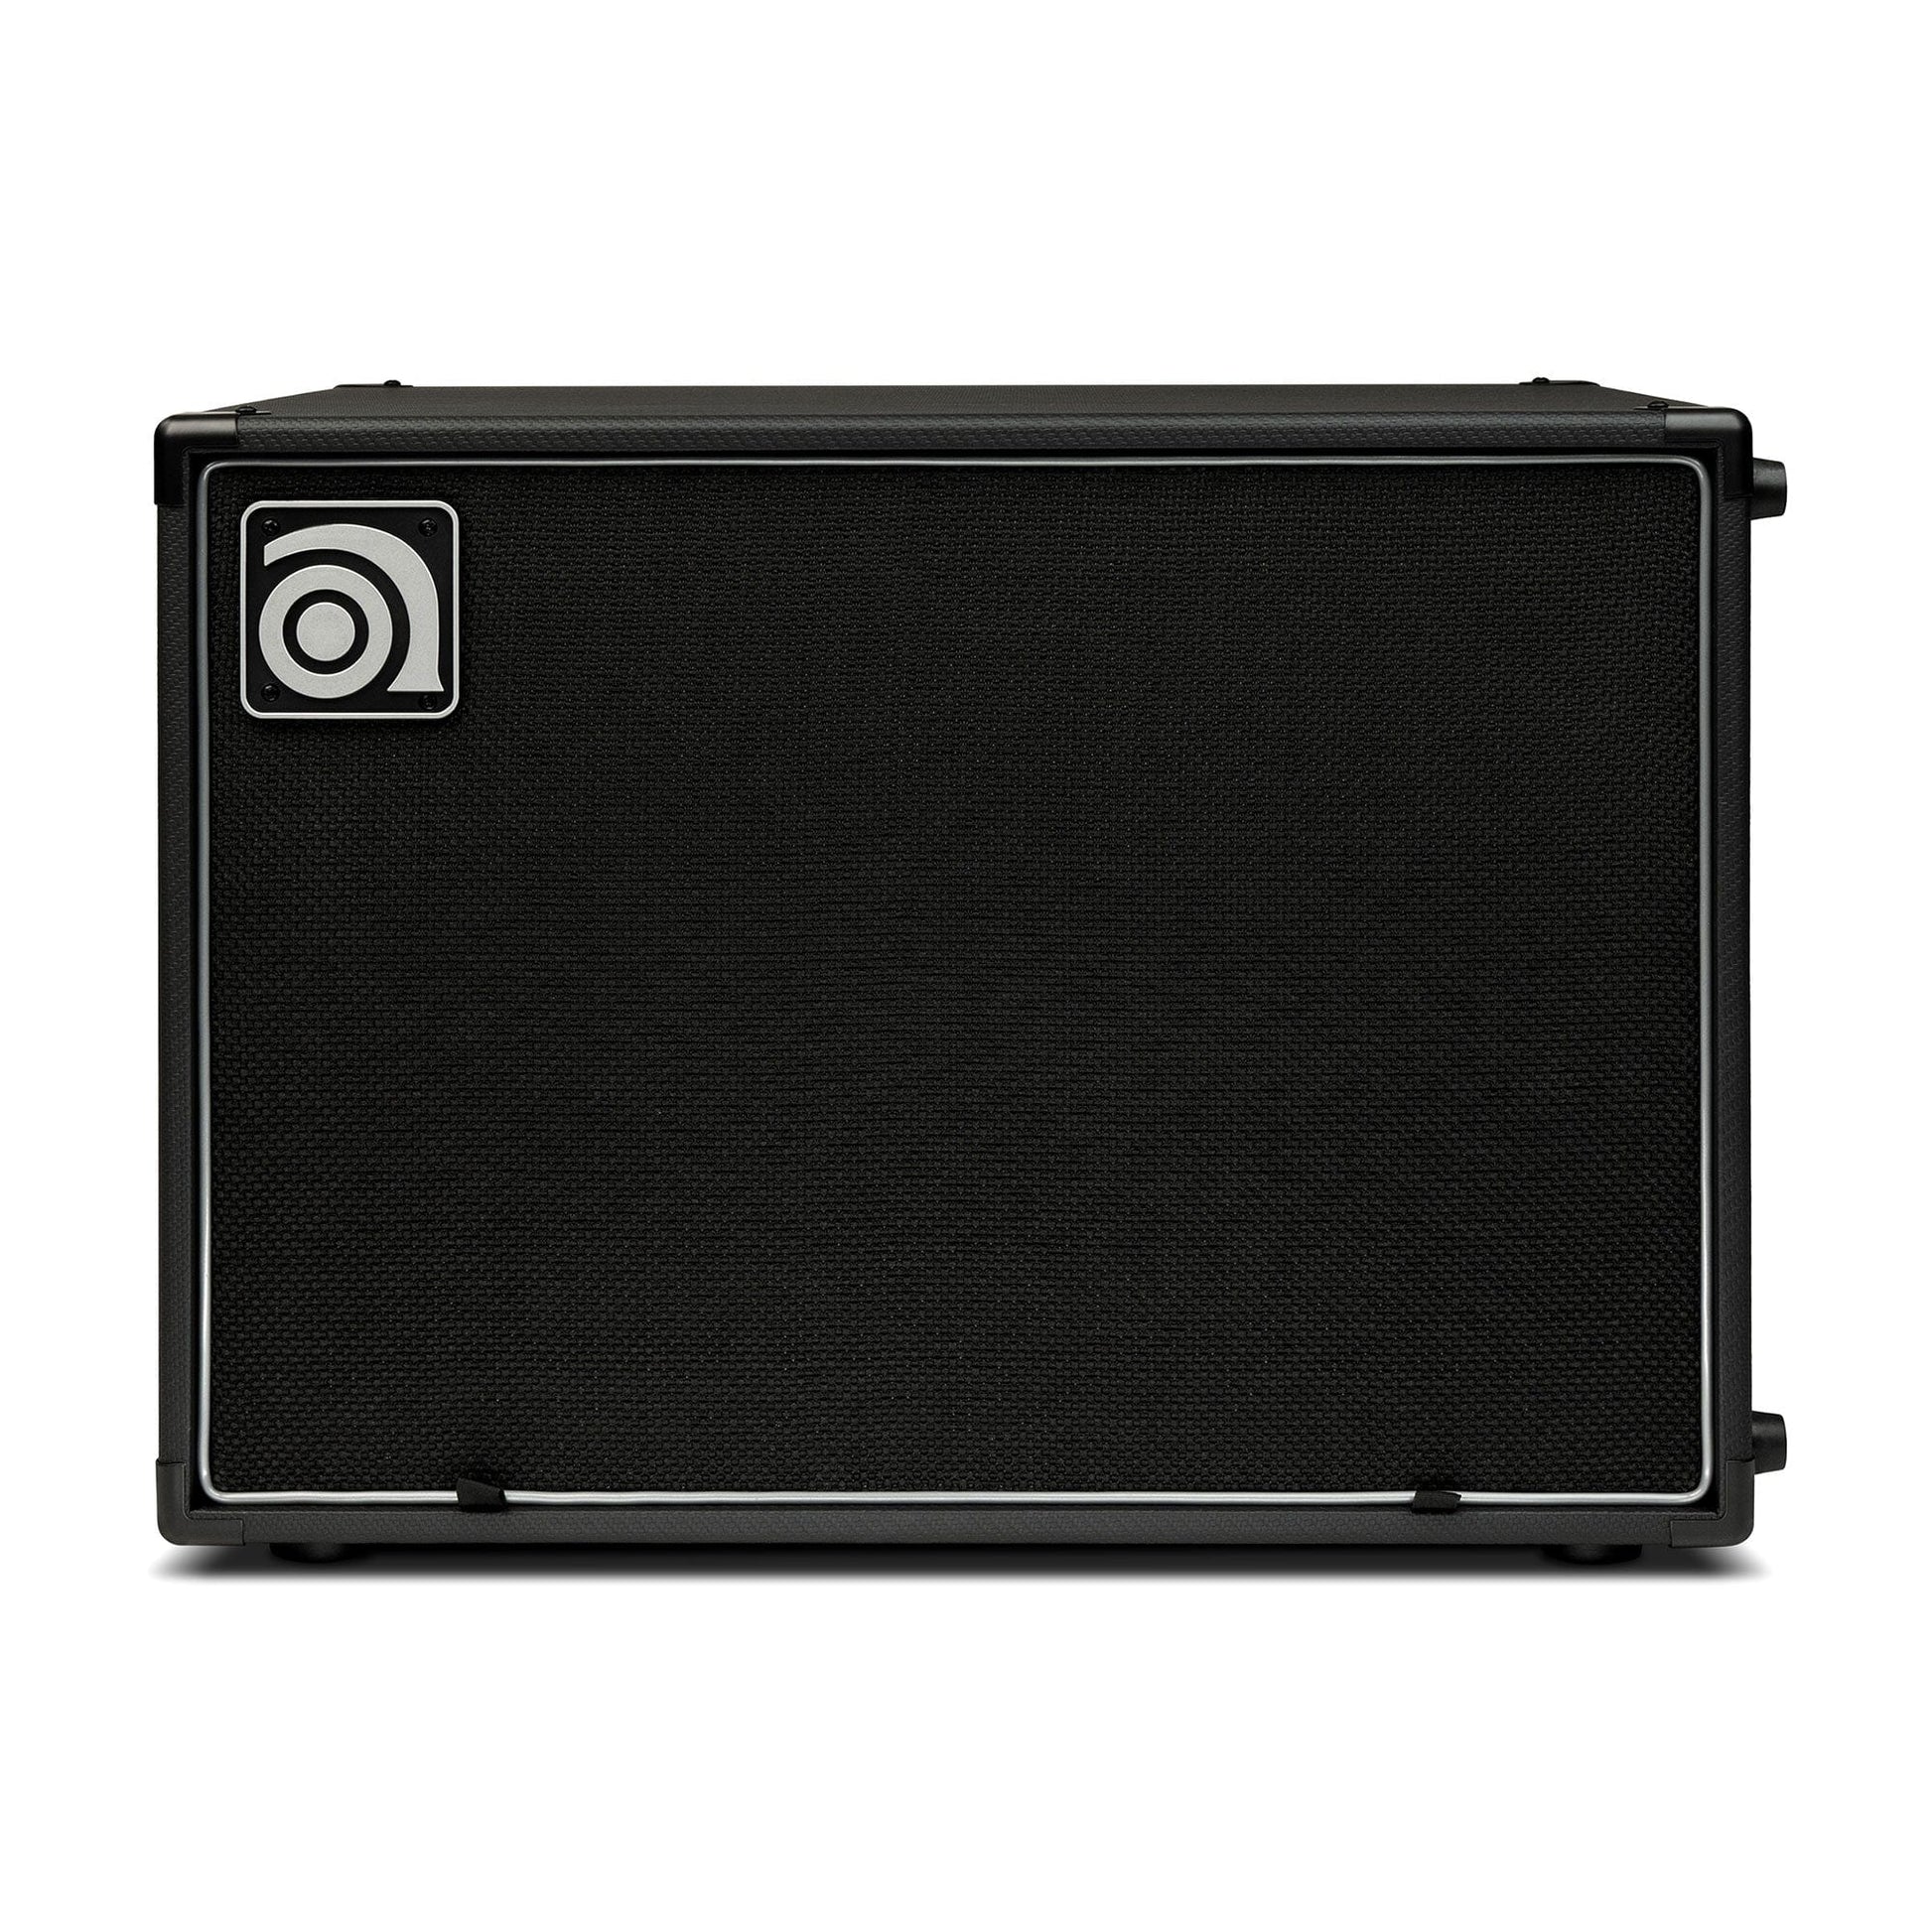 Ampeg Venture VB-210 2x10 Bass Amp Cabinet Amps / Bass Cabinets